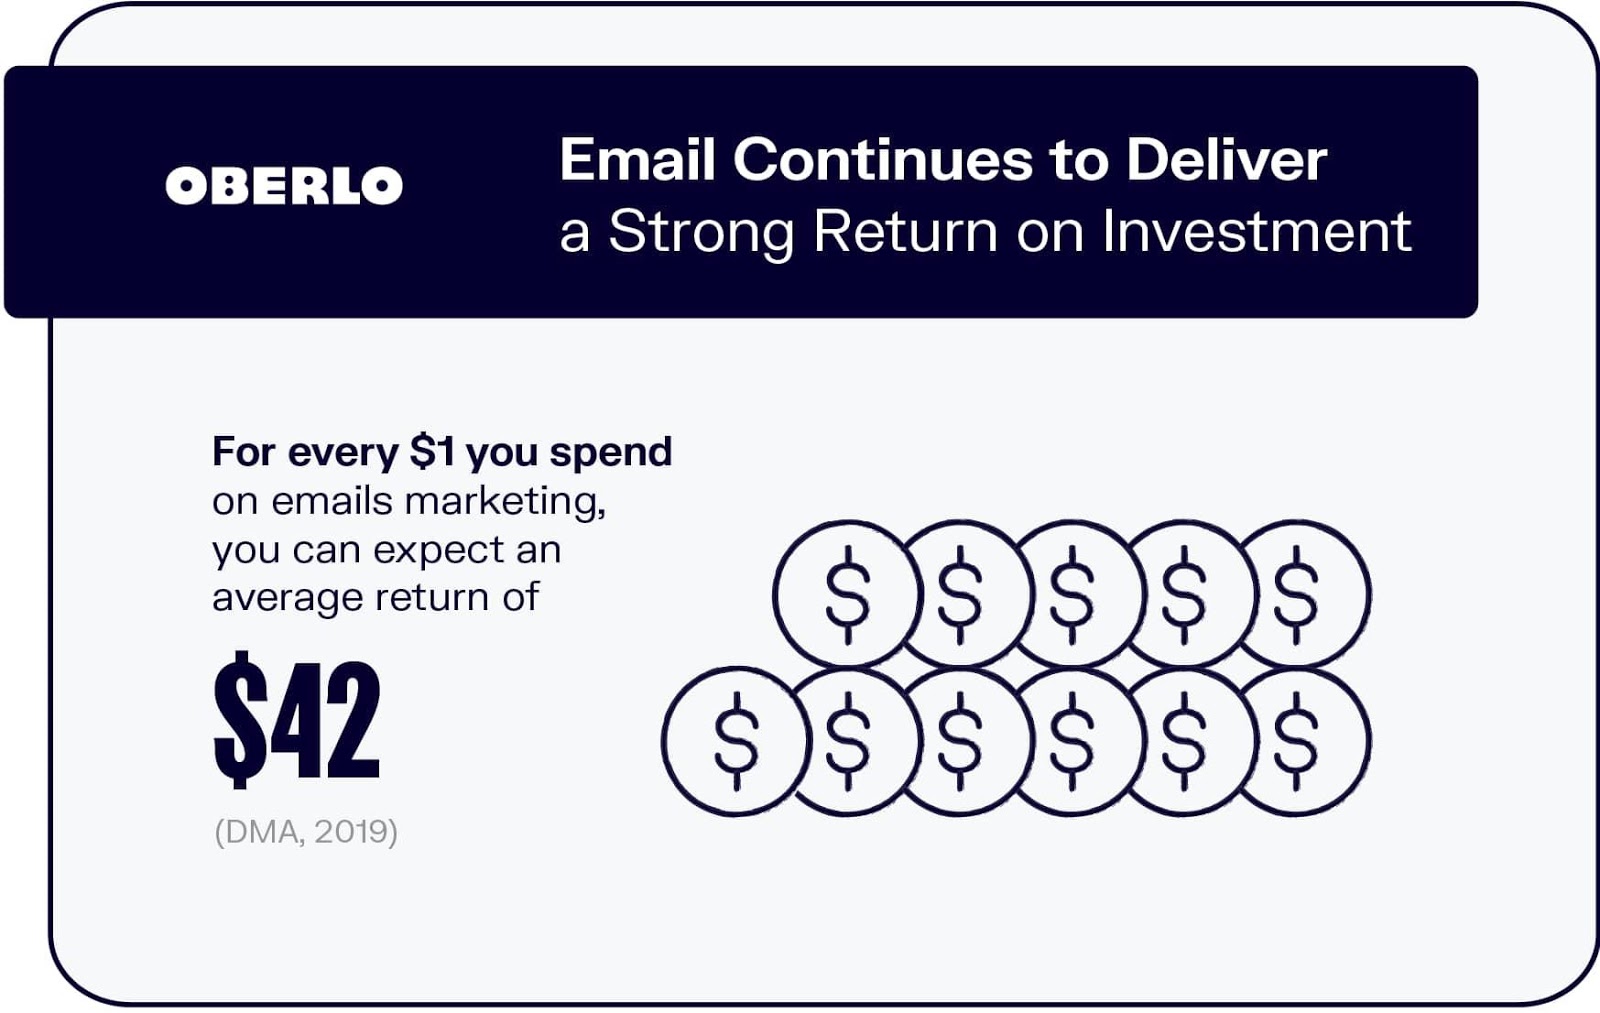 Graphic showing that for every $1 you spend on emails marketing, you can expect an average return of $42. 